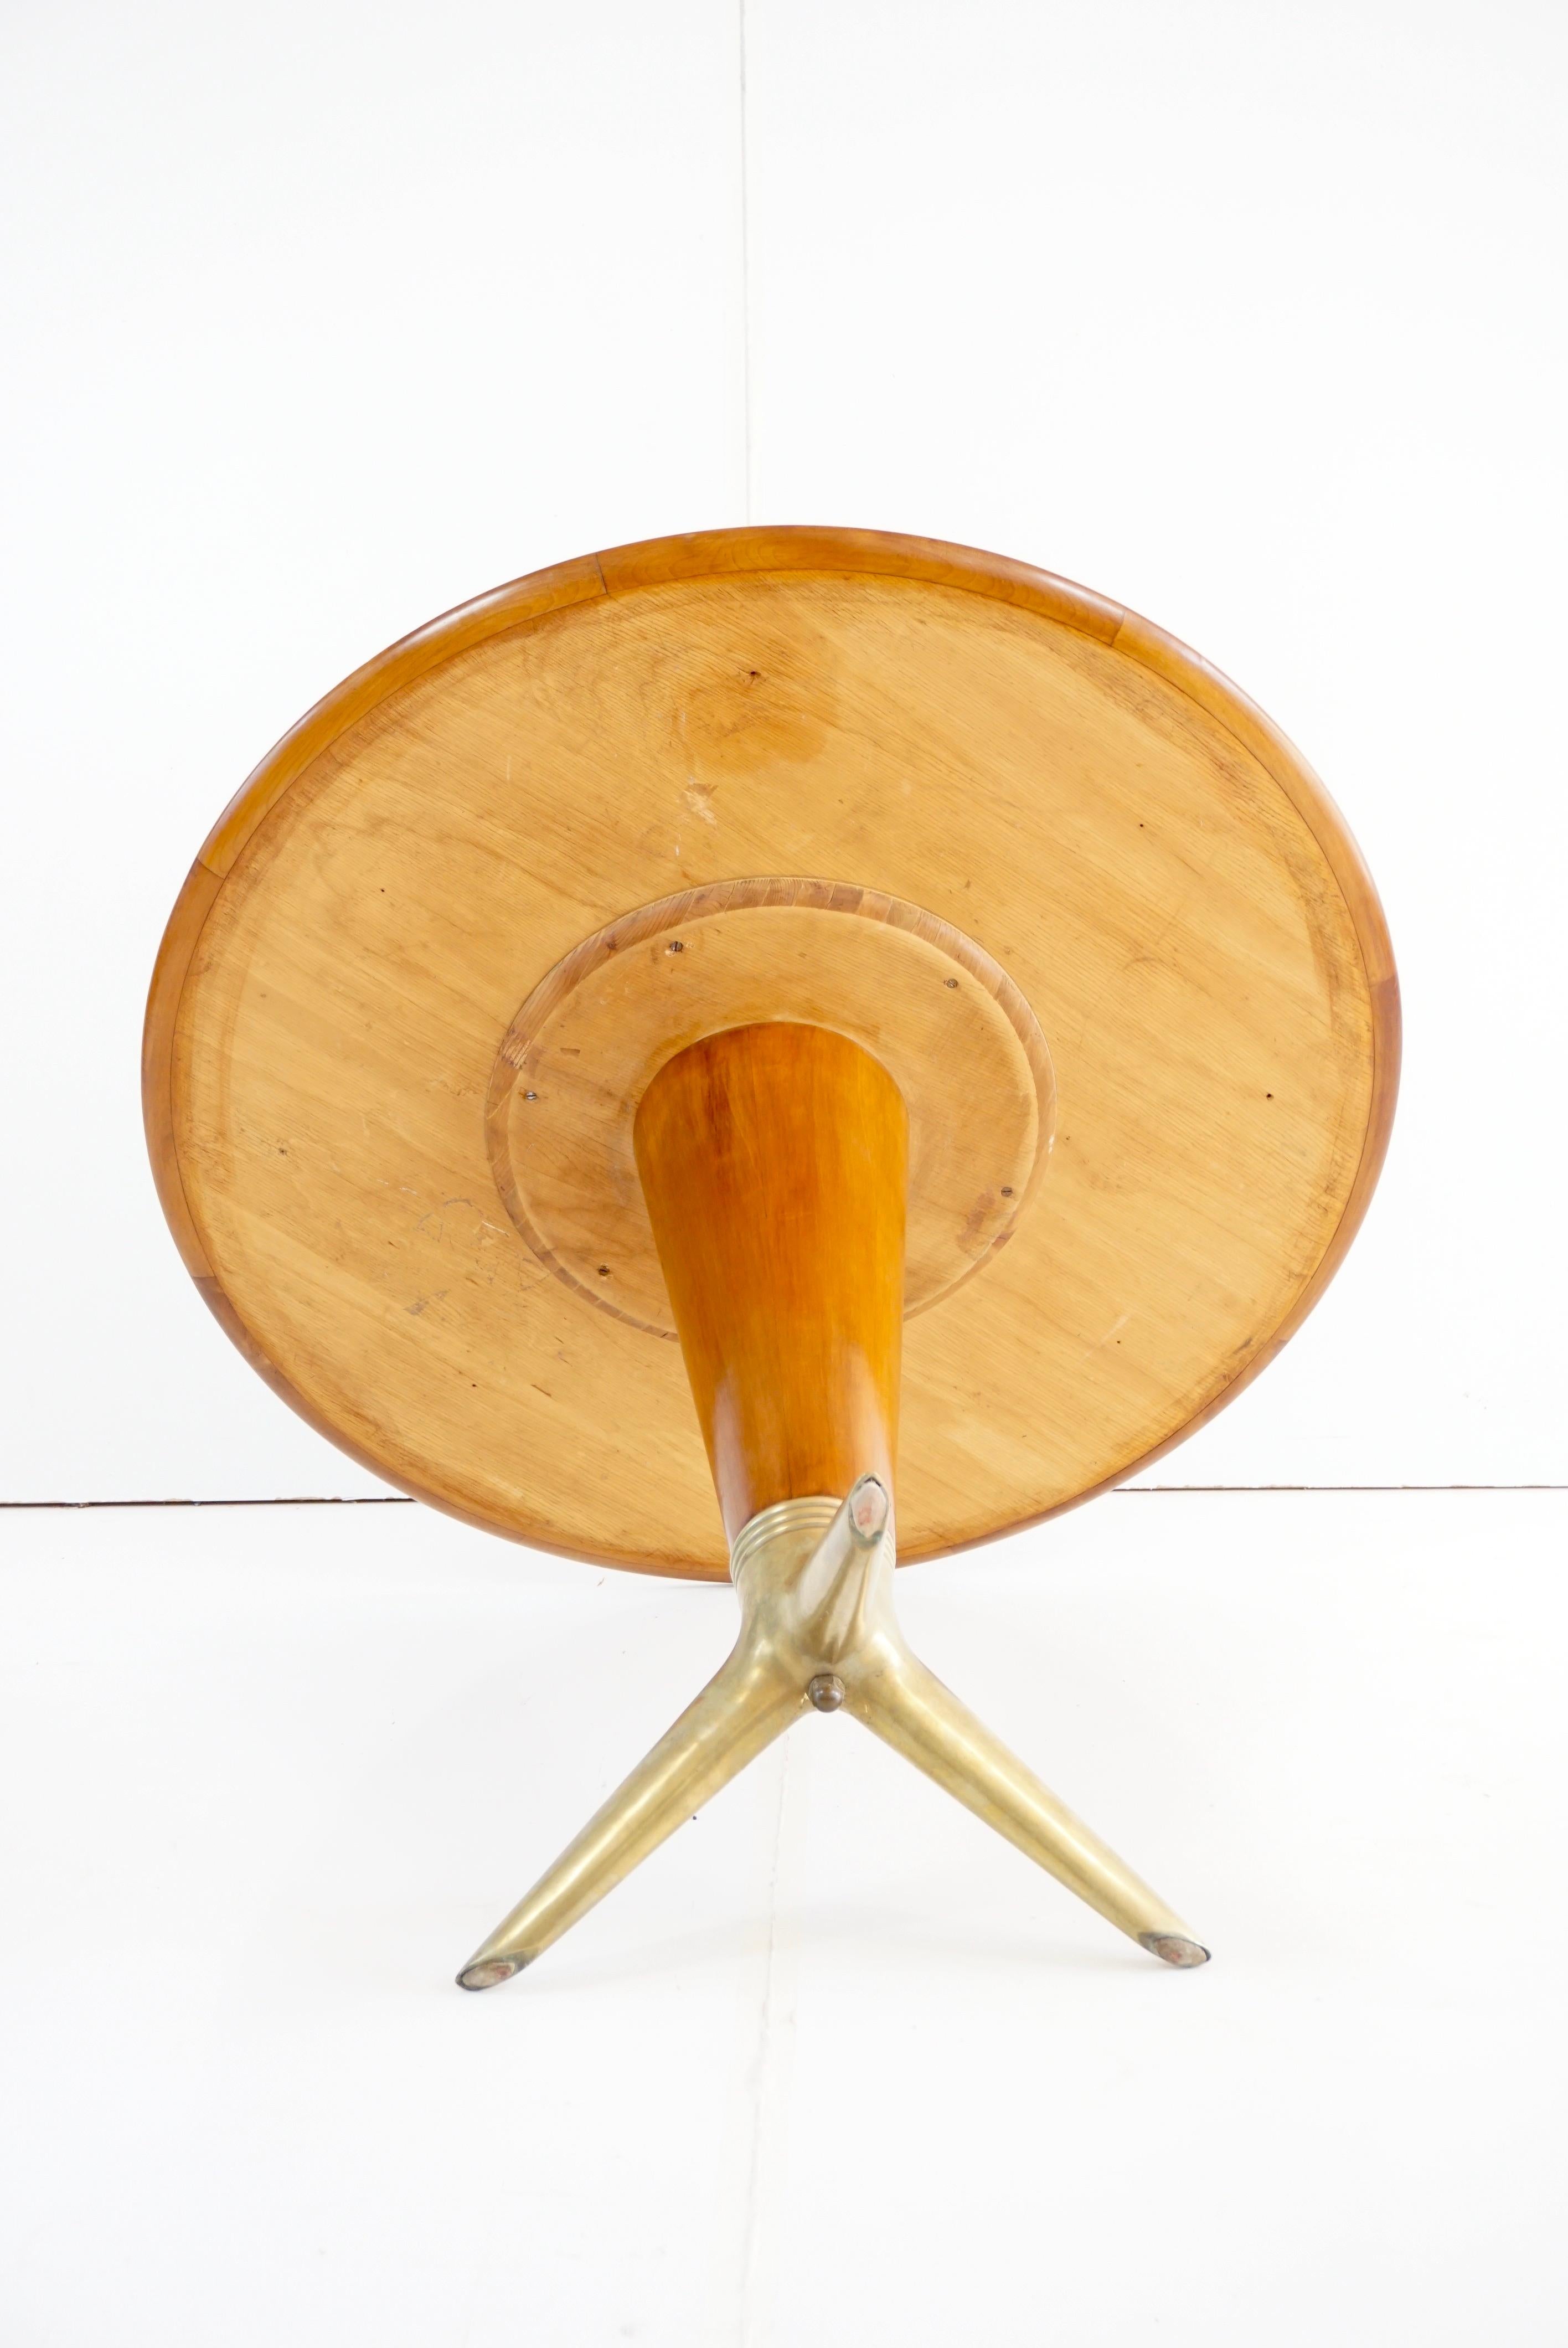 Rare Maple and Brass Round Center Table by I.S.A. Bergamo 1950 For Sale 9